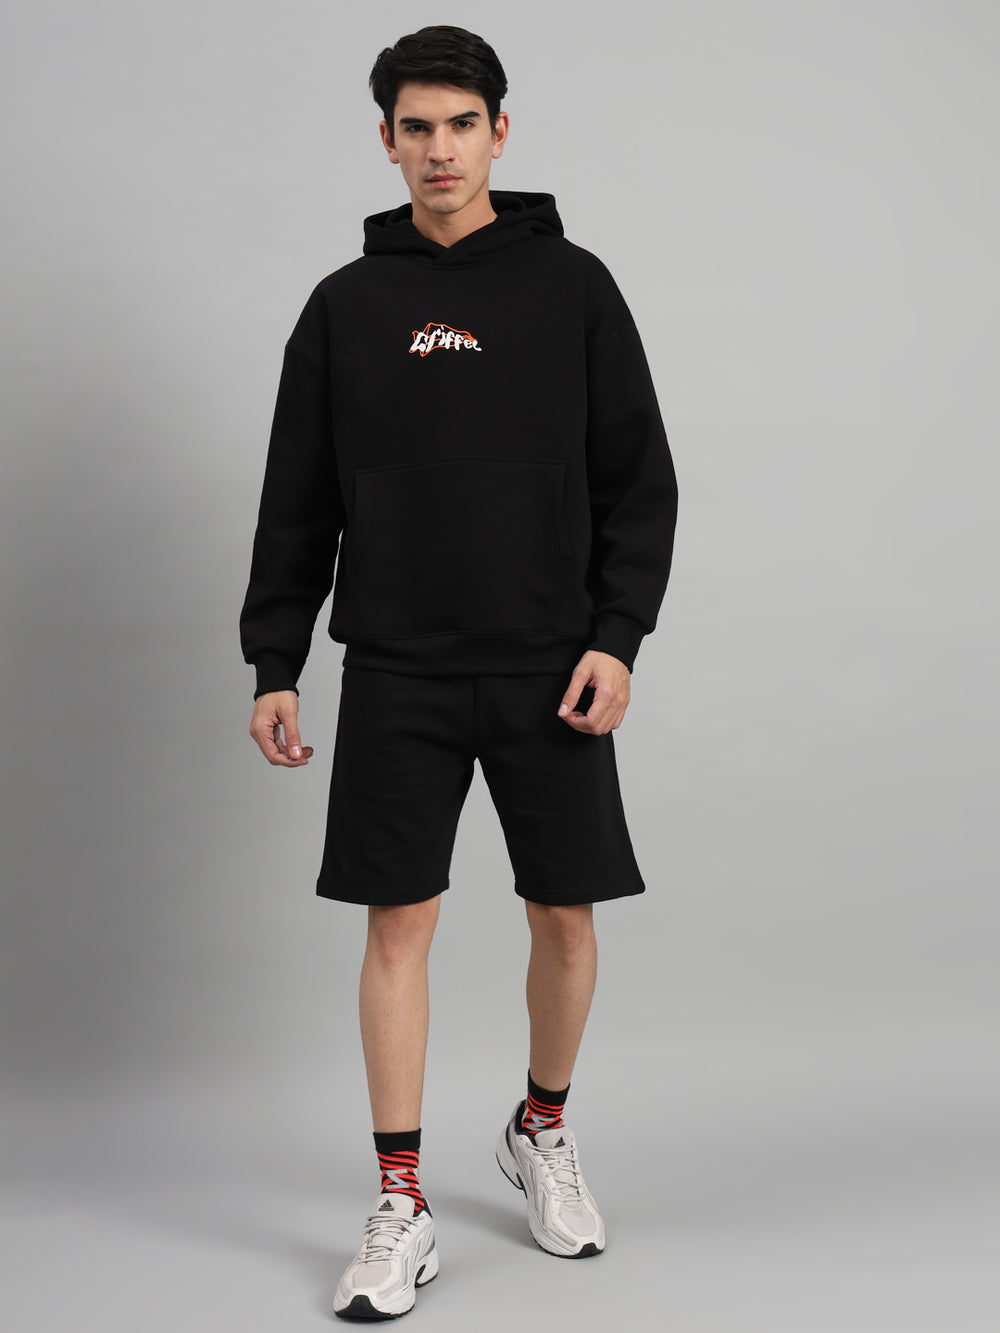 Griffel Men Oversized ONE HUNDRED % LOYAL Back Print 100% Cotton Black Fleece Hoodie and Shorts - griffel